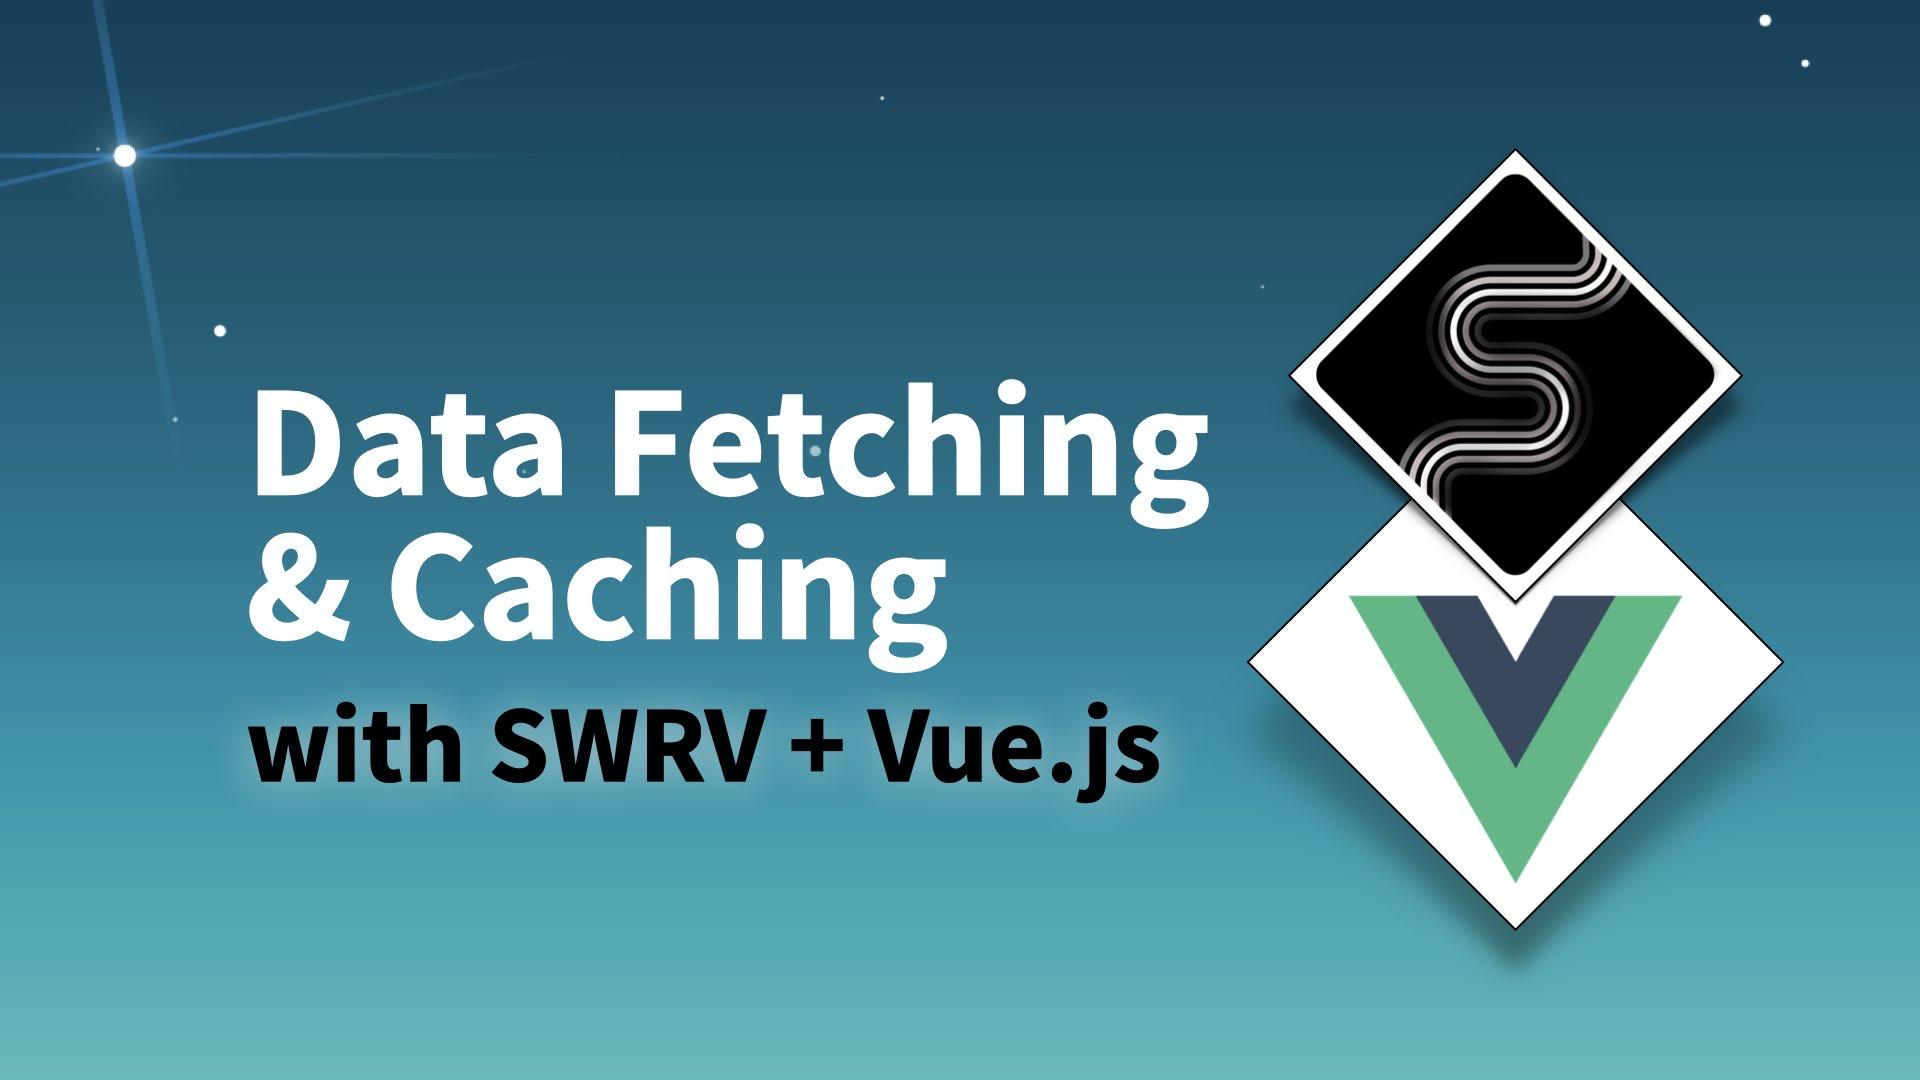 Data fetching and caching with SWR and Vue.js